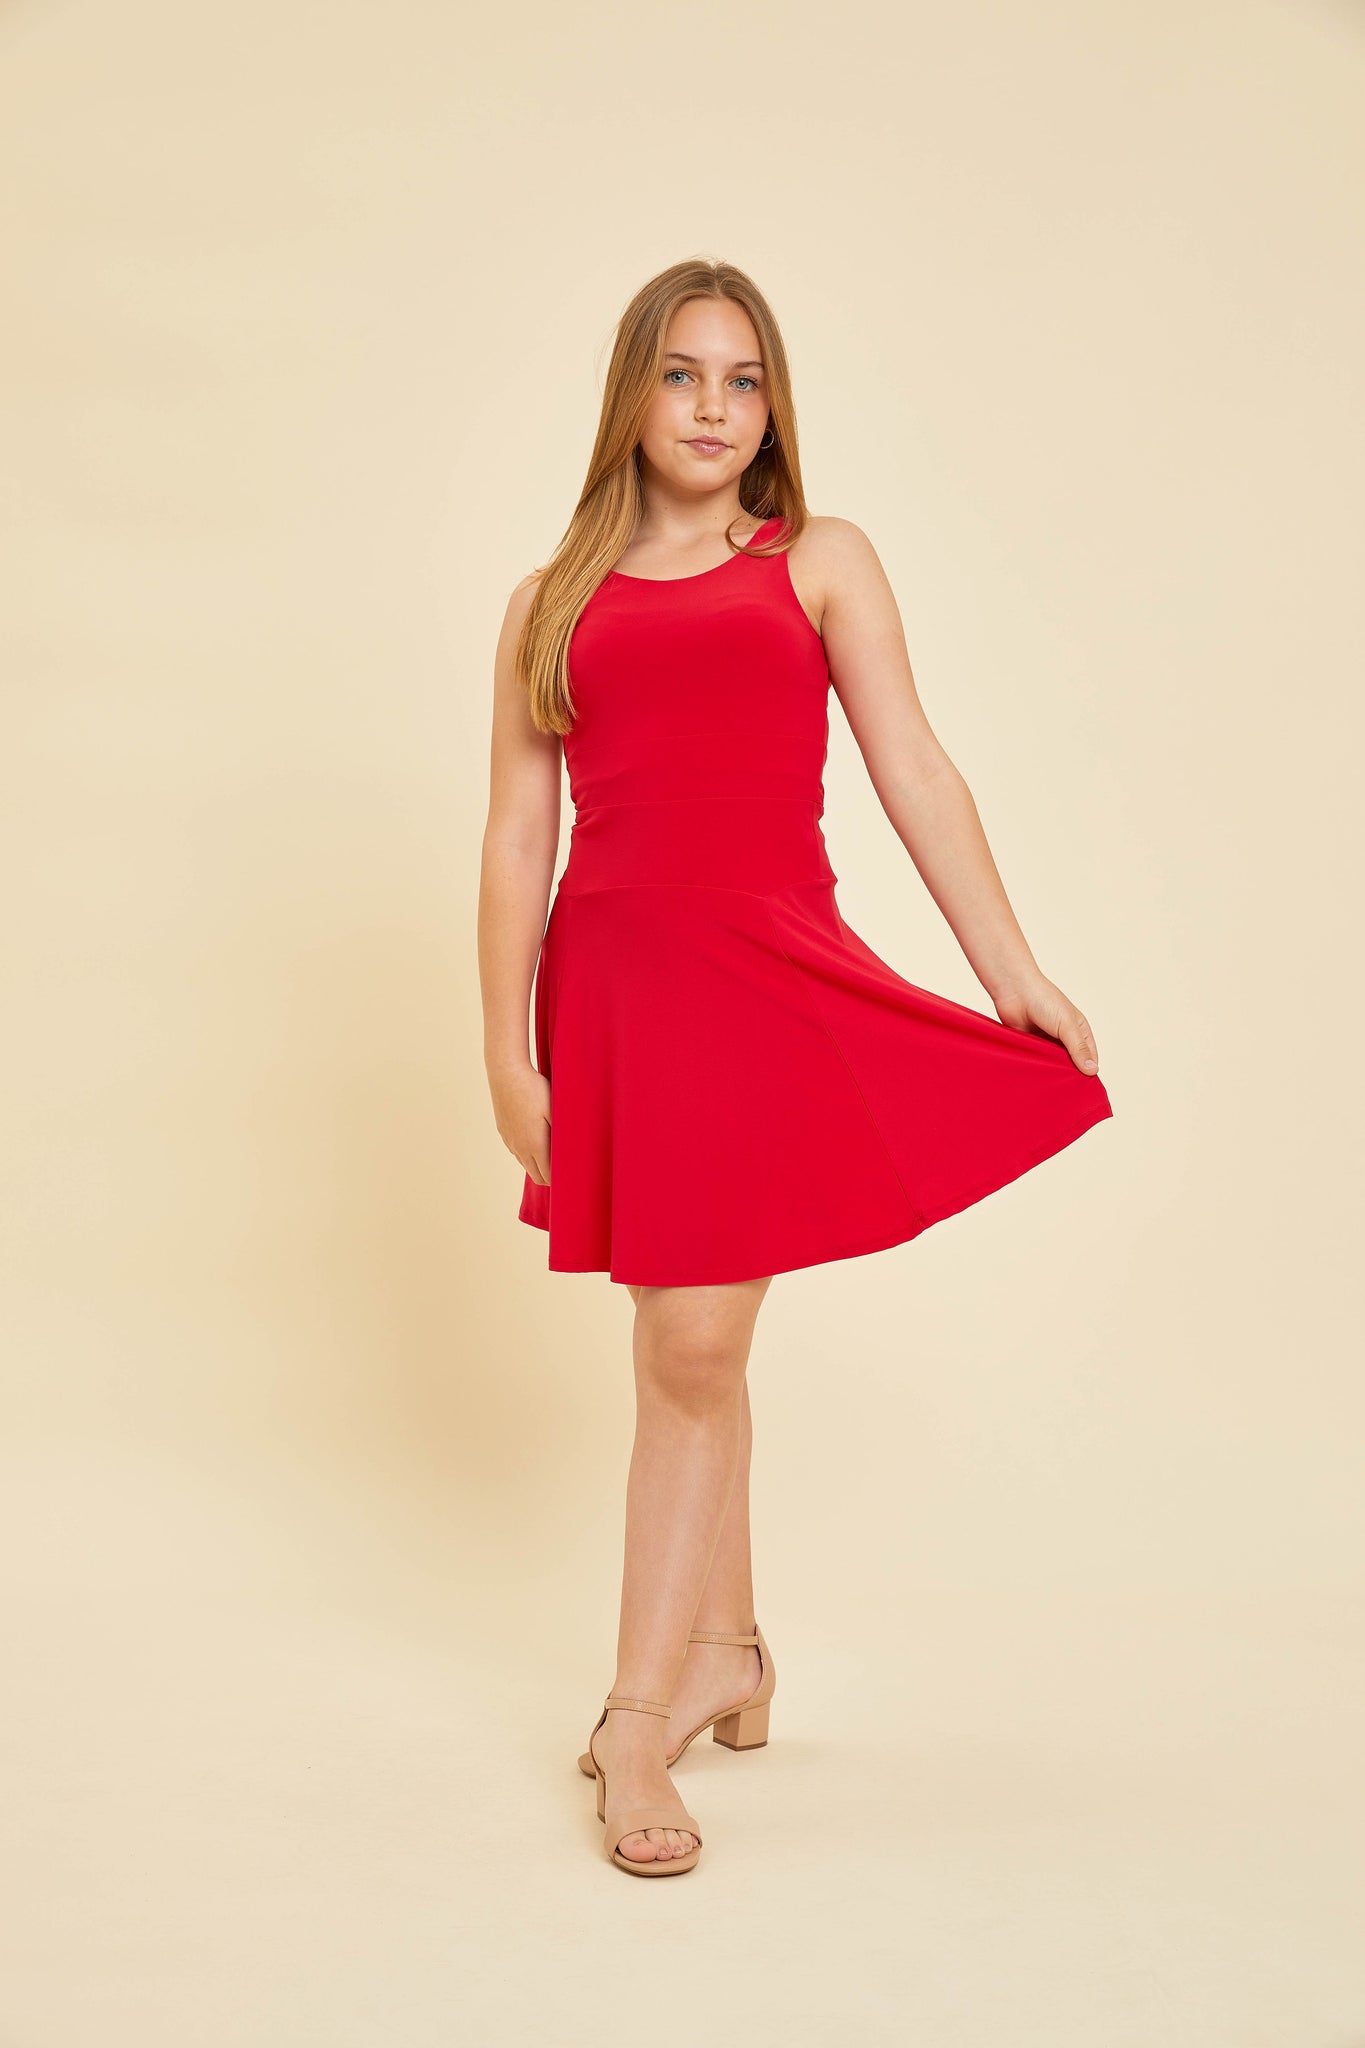 Blonde girl in a red skater dress and nude heel.